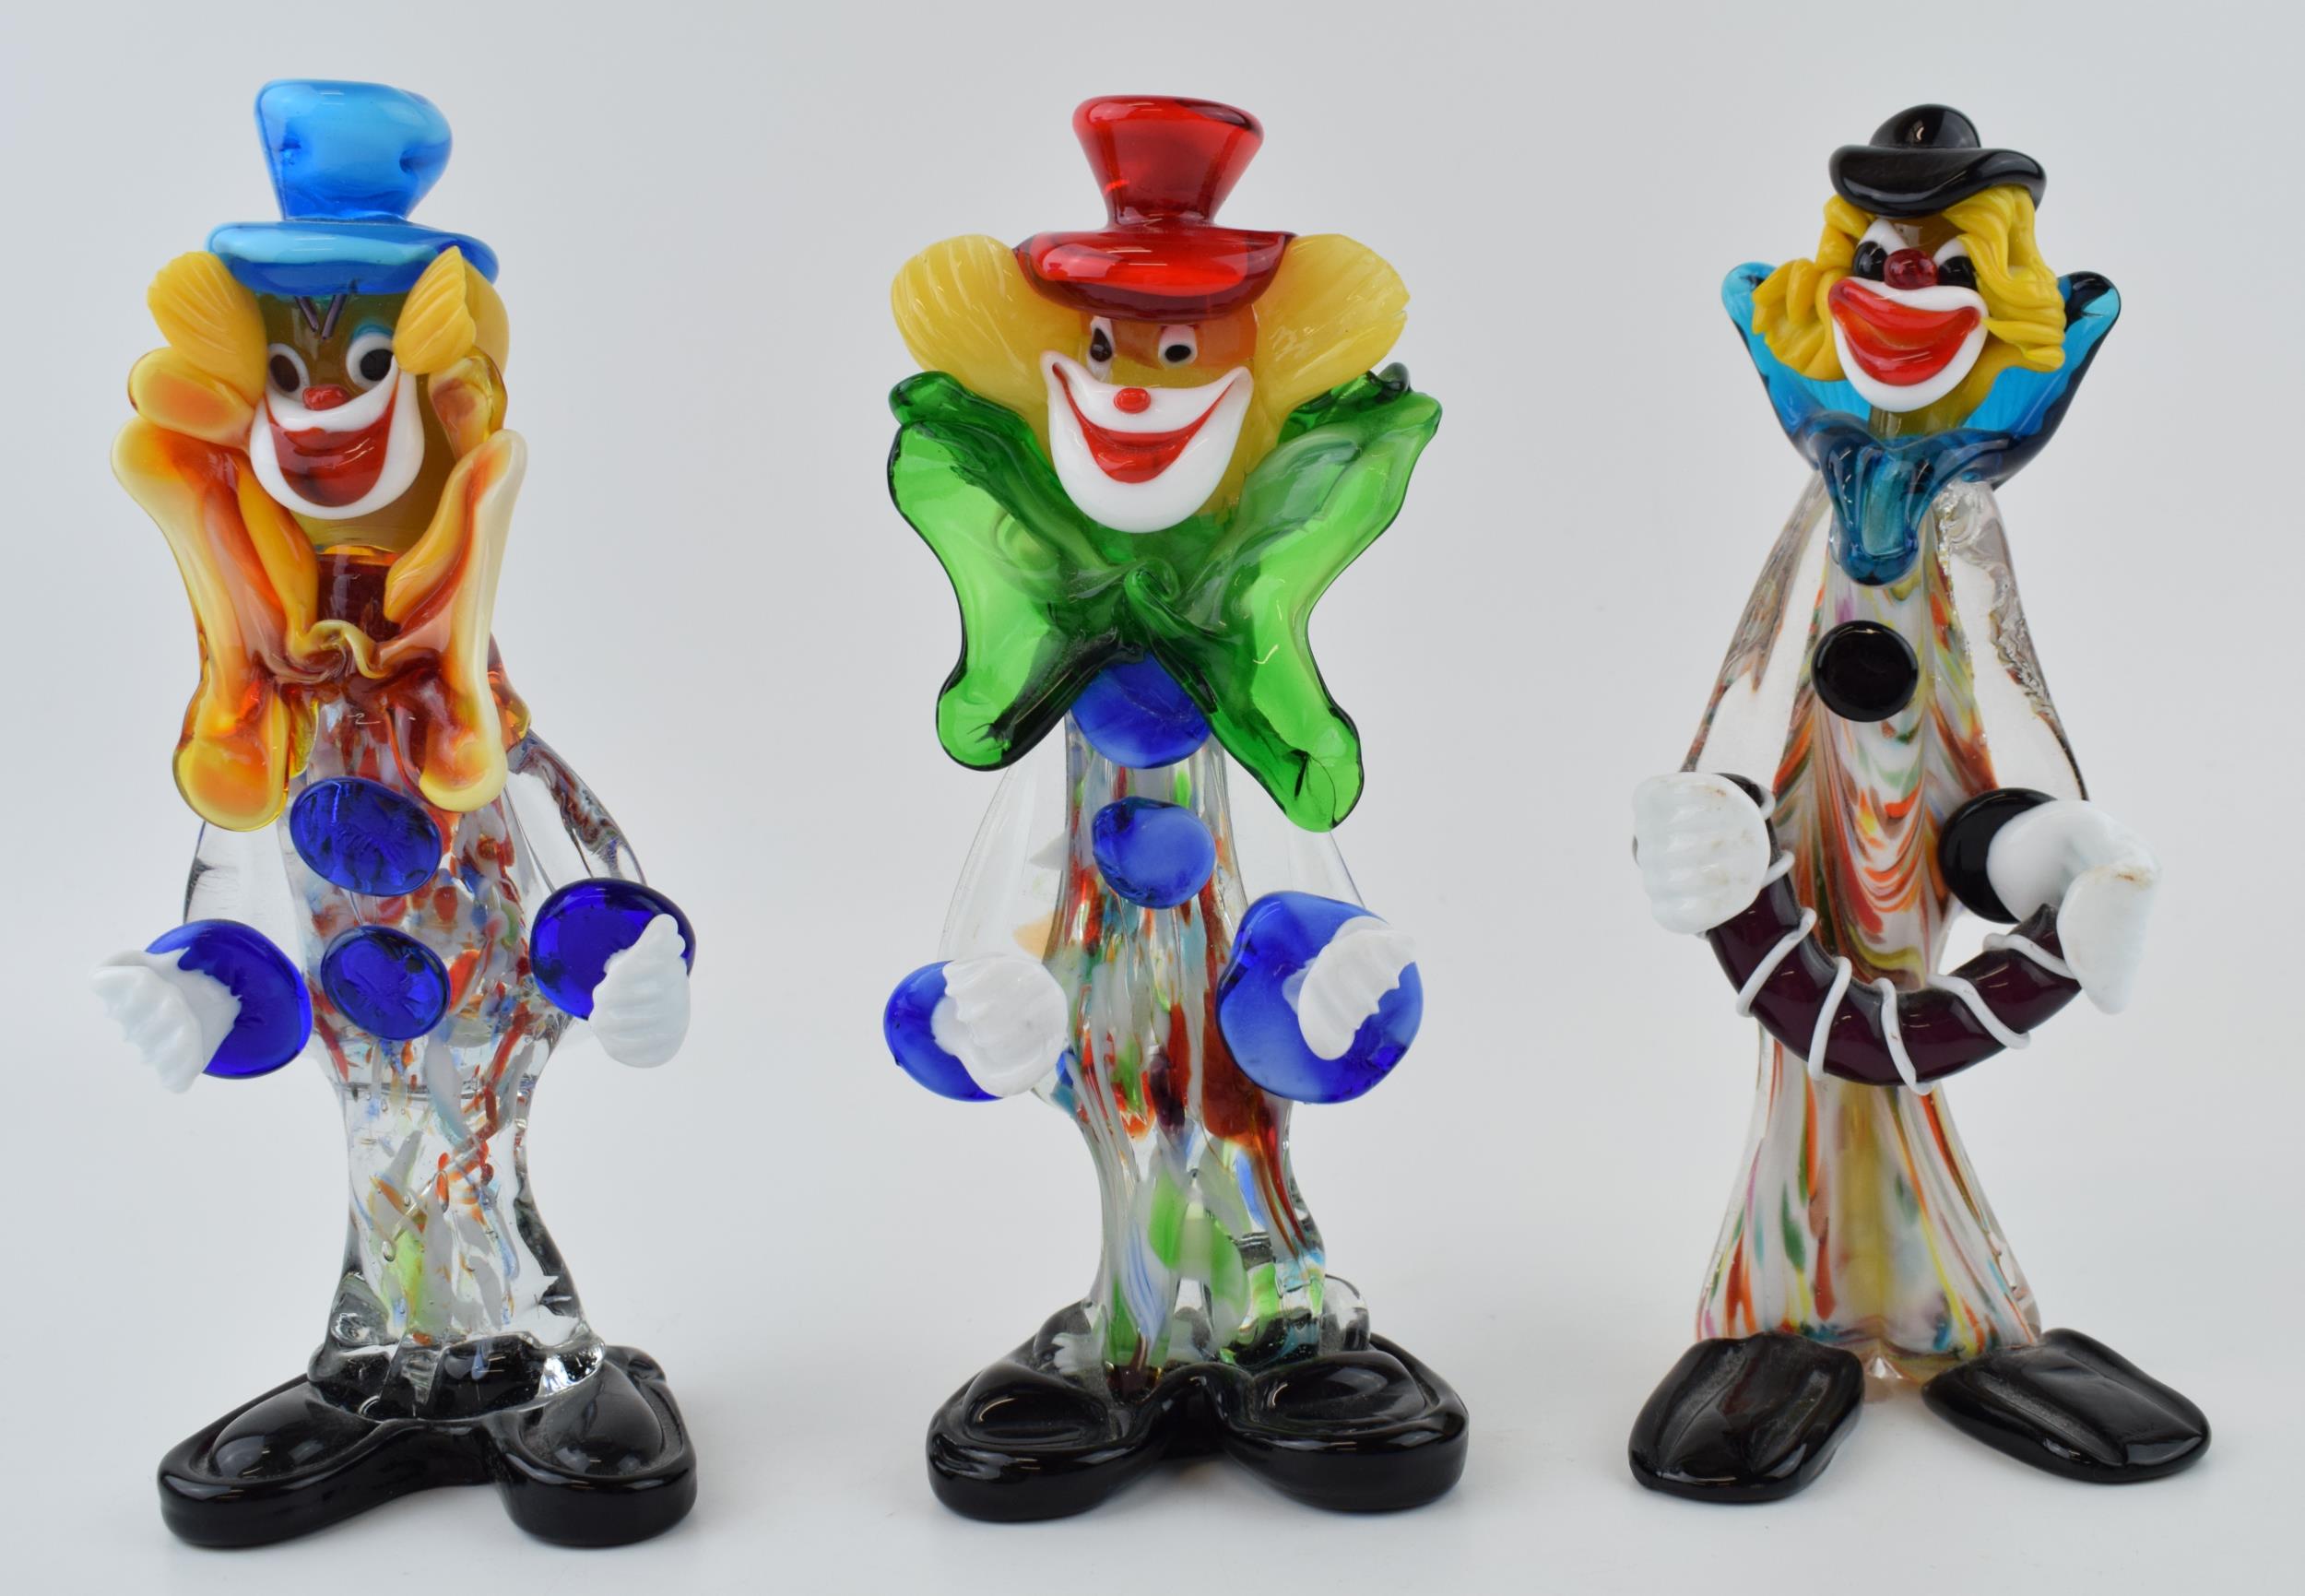 A trio of Murano glass clowns, 22cm tall (3). In good condition with no obvious damage or